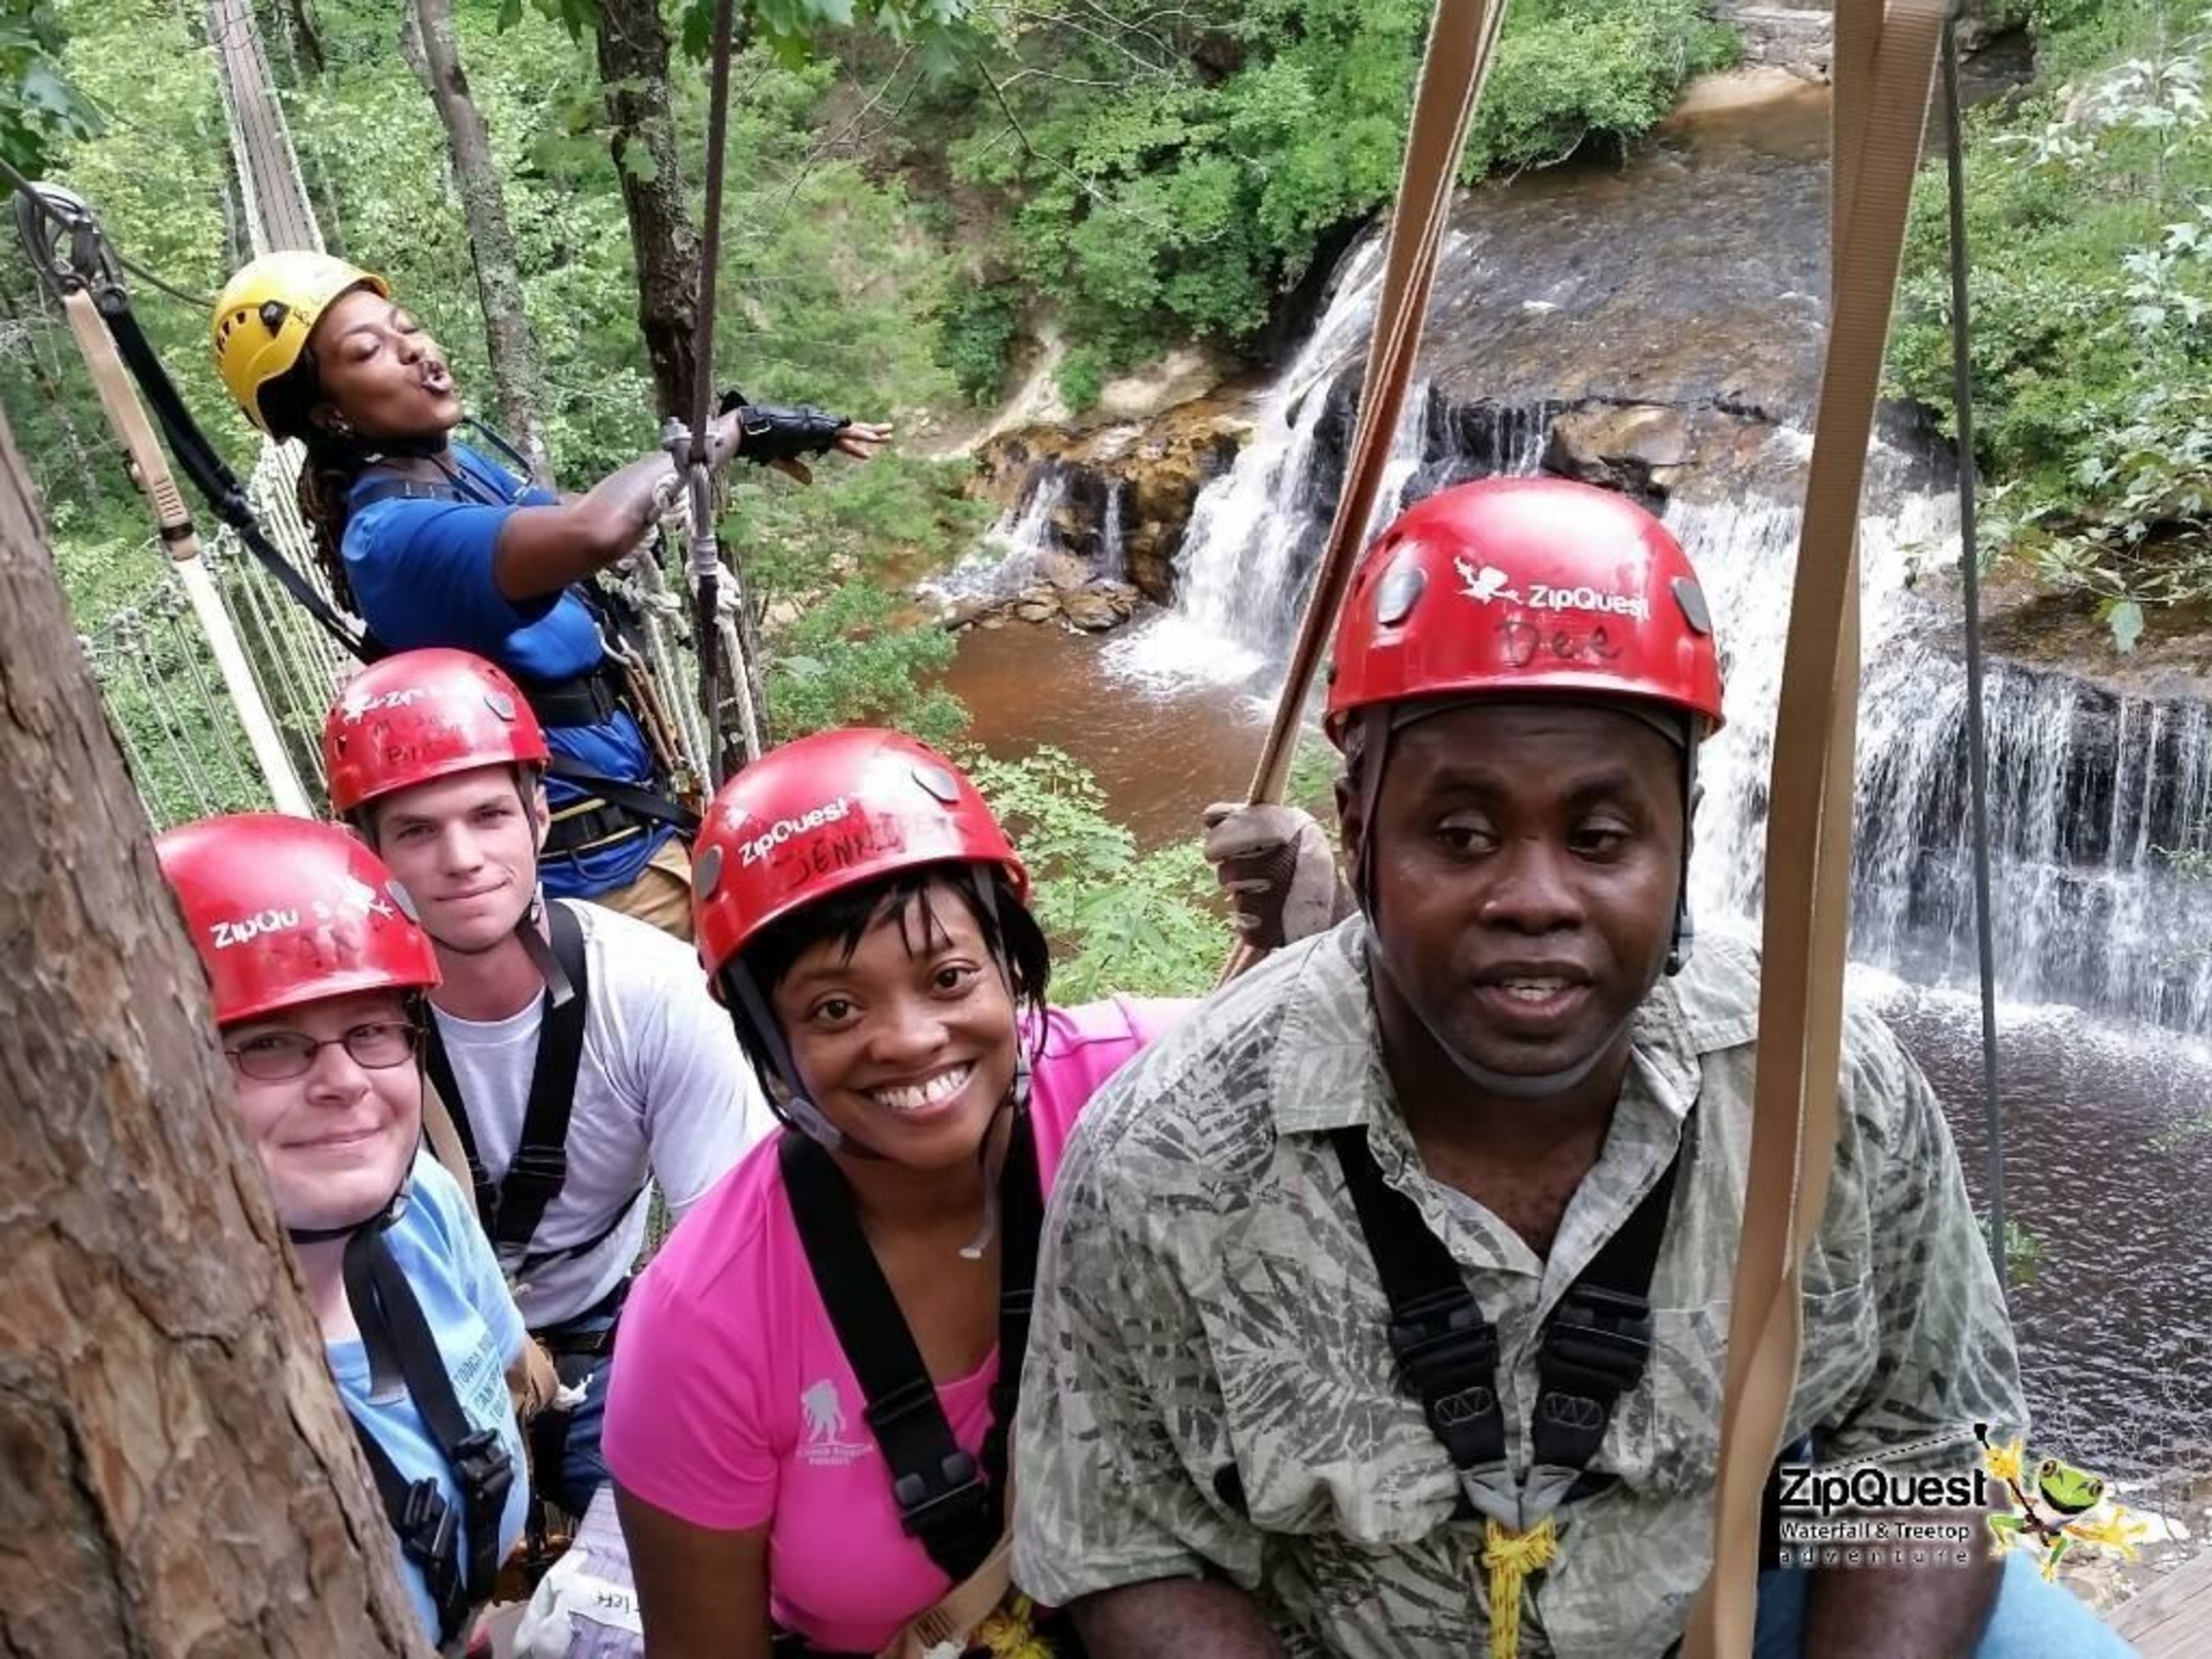 Veterans and their families explored Carver's Falls in Fayetteville during a Wounded Warrior Project trip to ZipQuest Waterfall and Treetop Adventure.